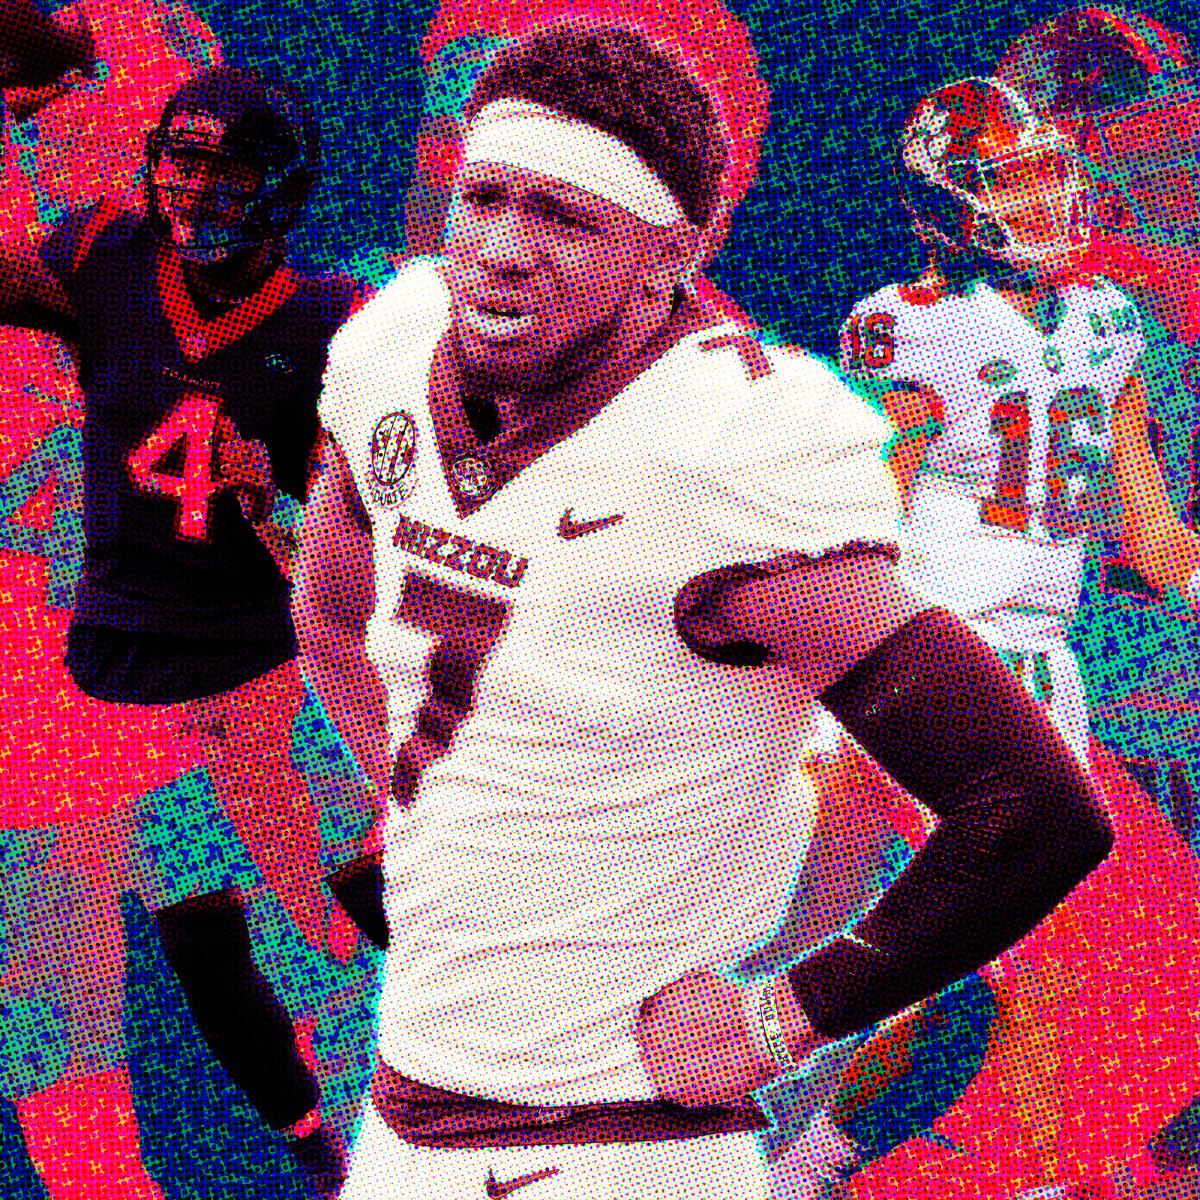 Kelly Bryant reflects on Mizzou, eagerly awaits NFL Draft